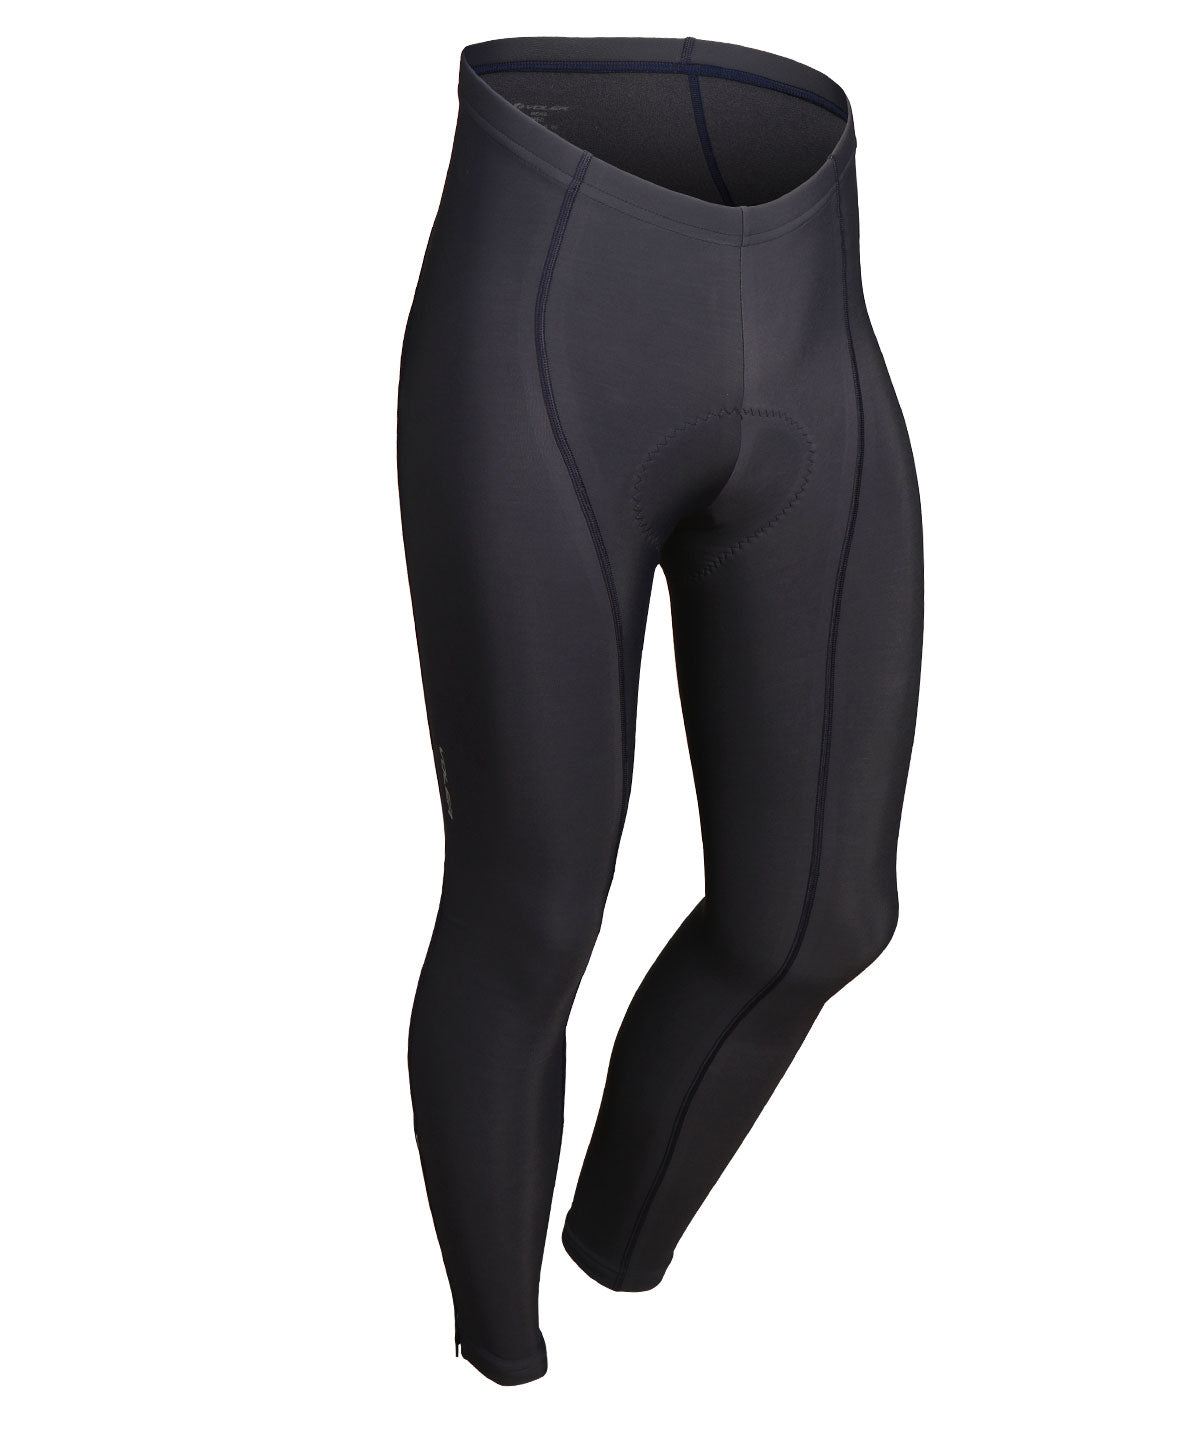 M'S ARTICO X THERMAL TIGHTS